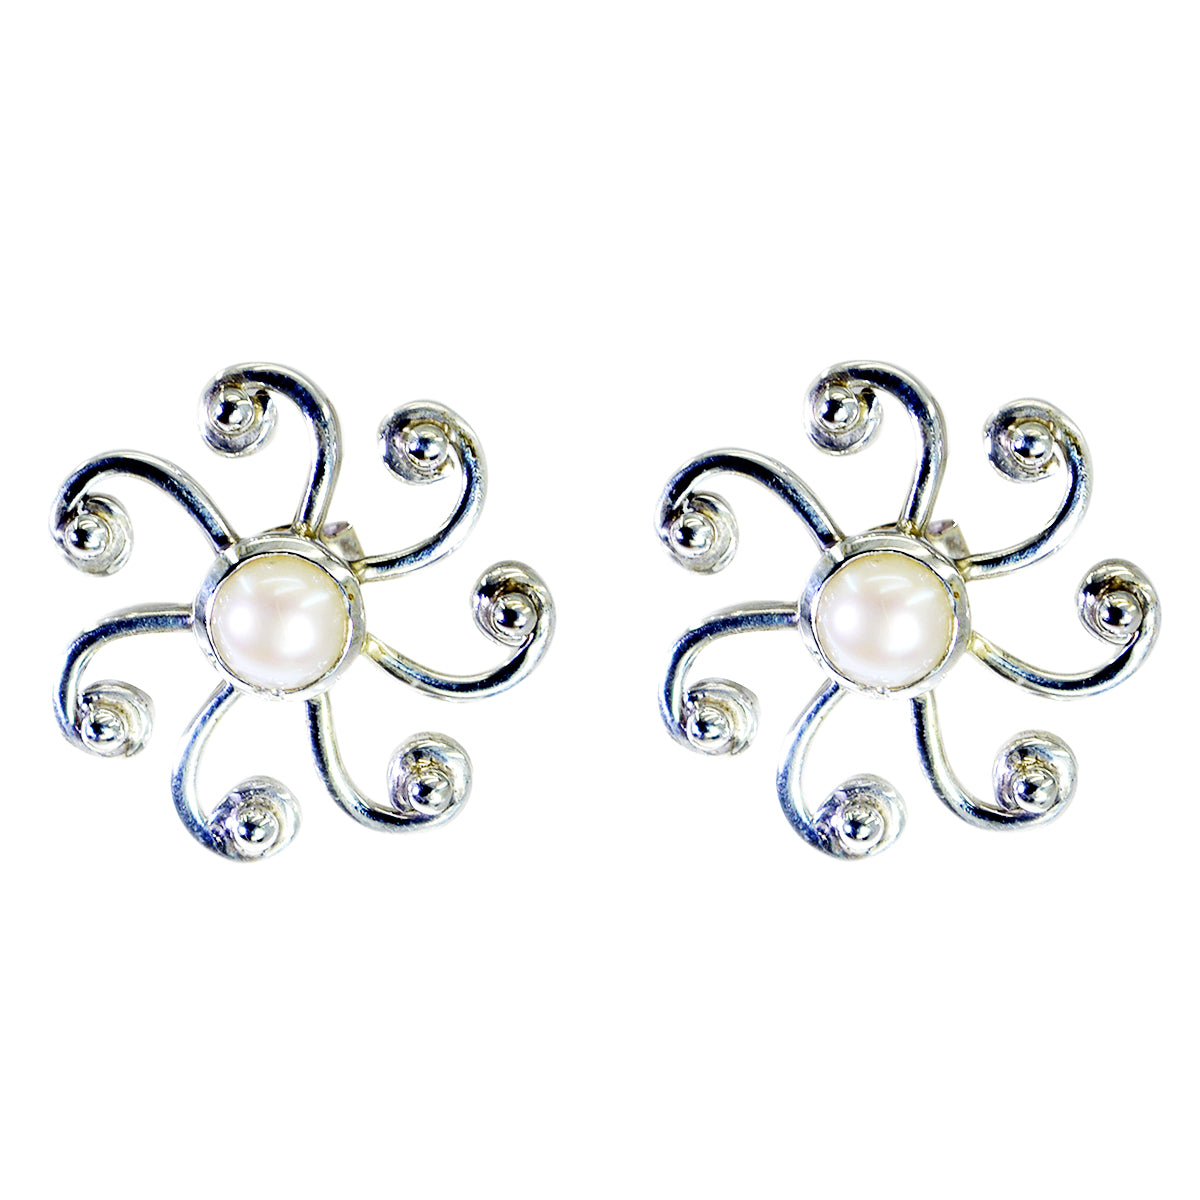 Riyo Genuine Gems round Cabochon White Peral Silver Earring gift for teacher's day